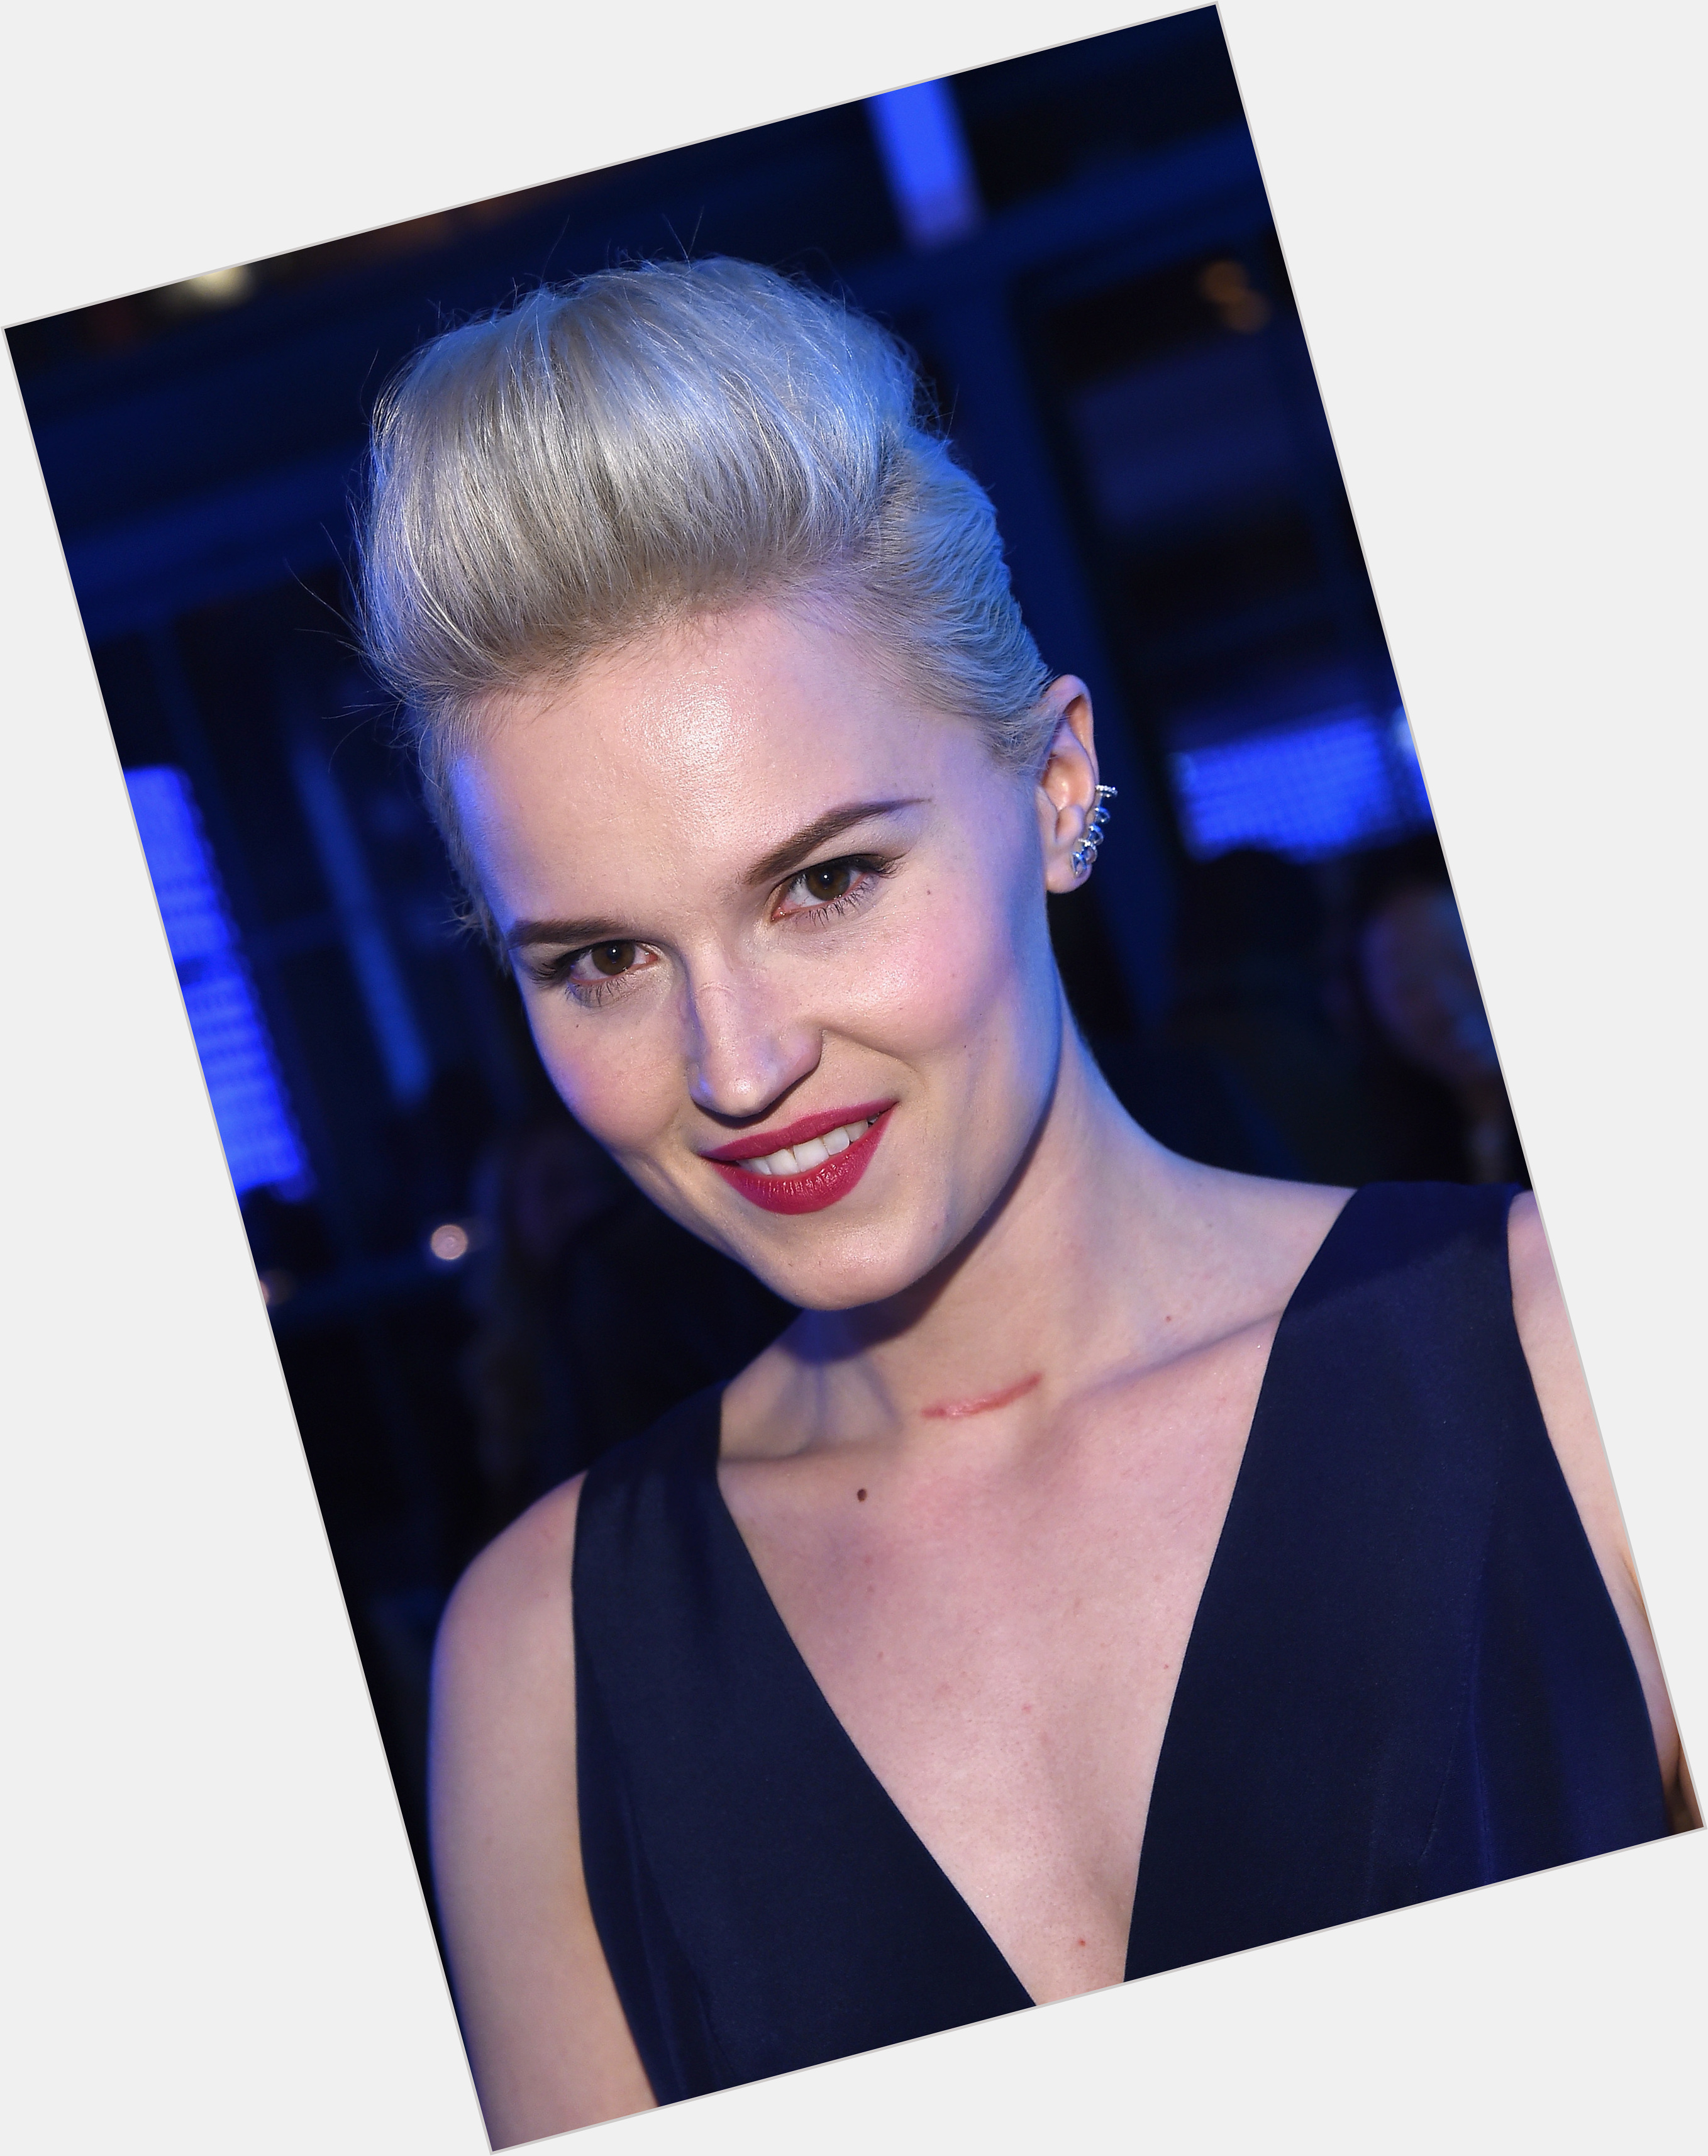 Https://fanpagepress.net/m/V/Veronica Roth Hairstyle 4